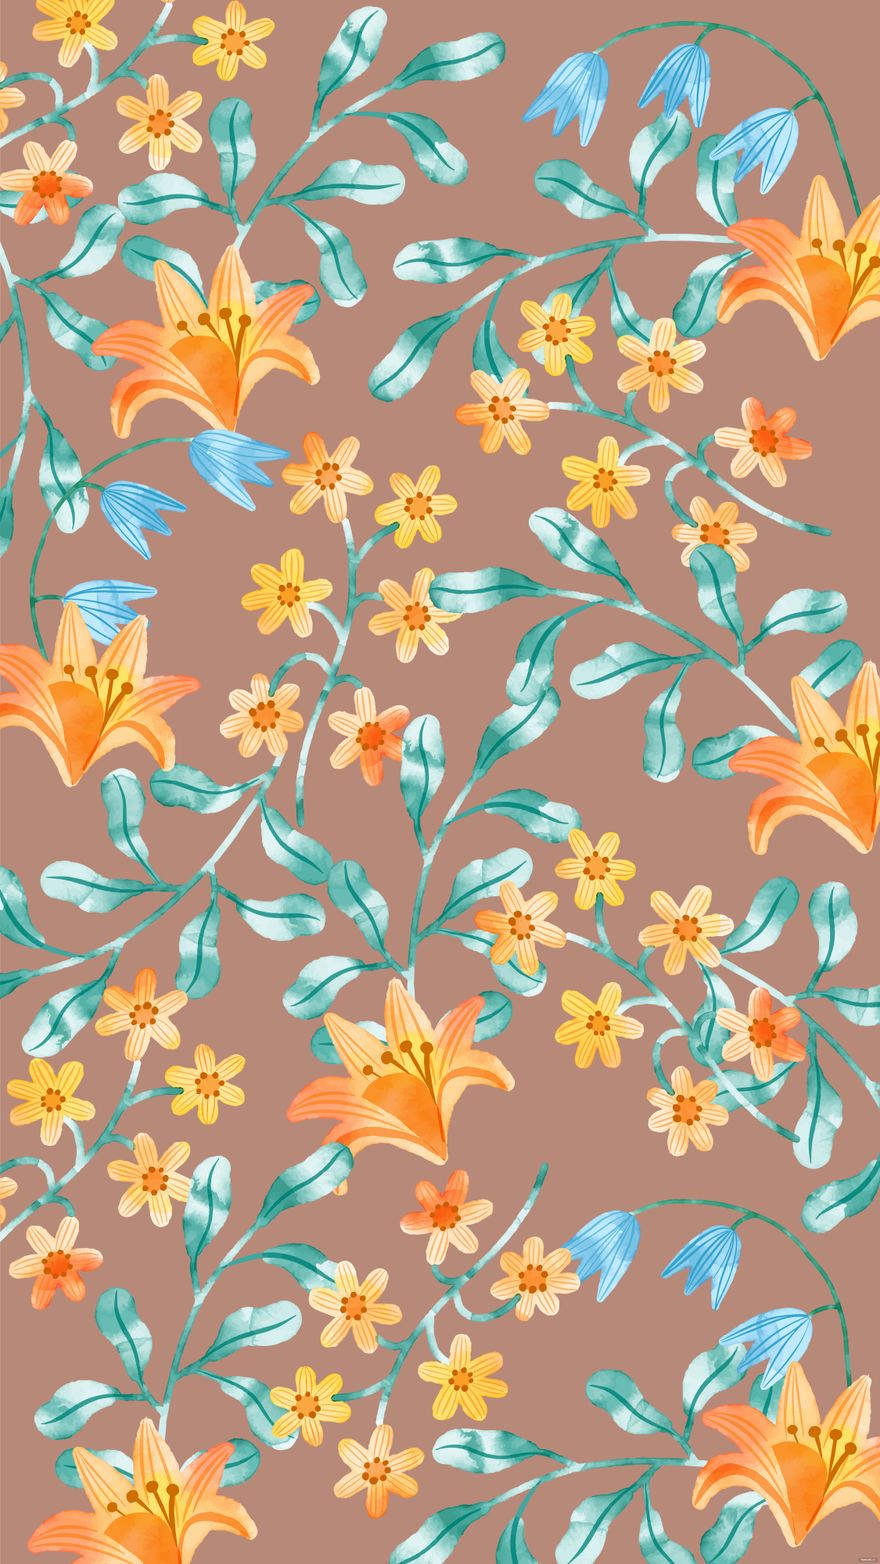 Free Aesthetic Retro Floral Background